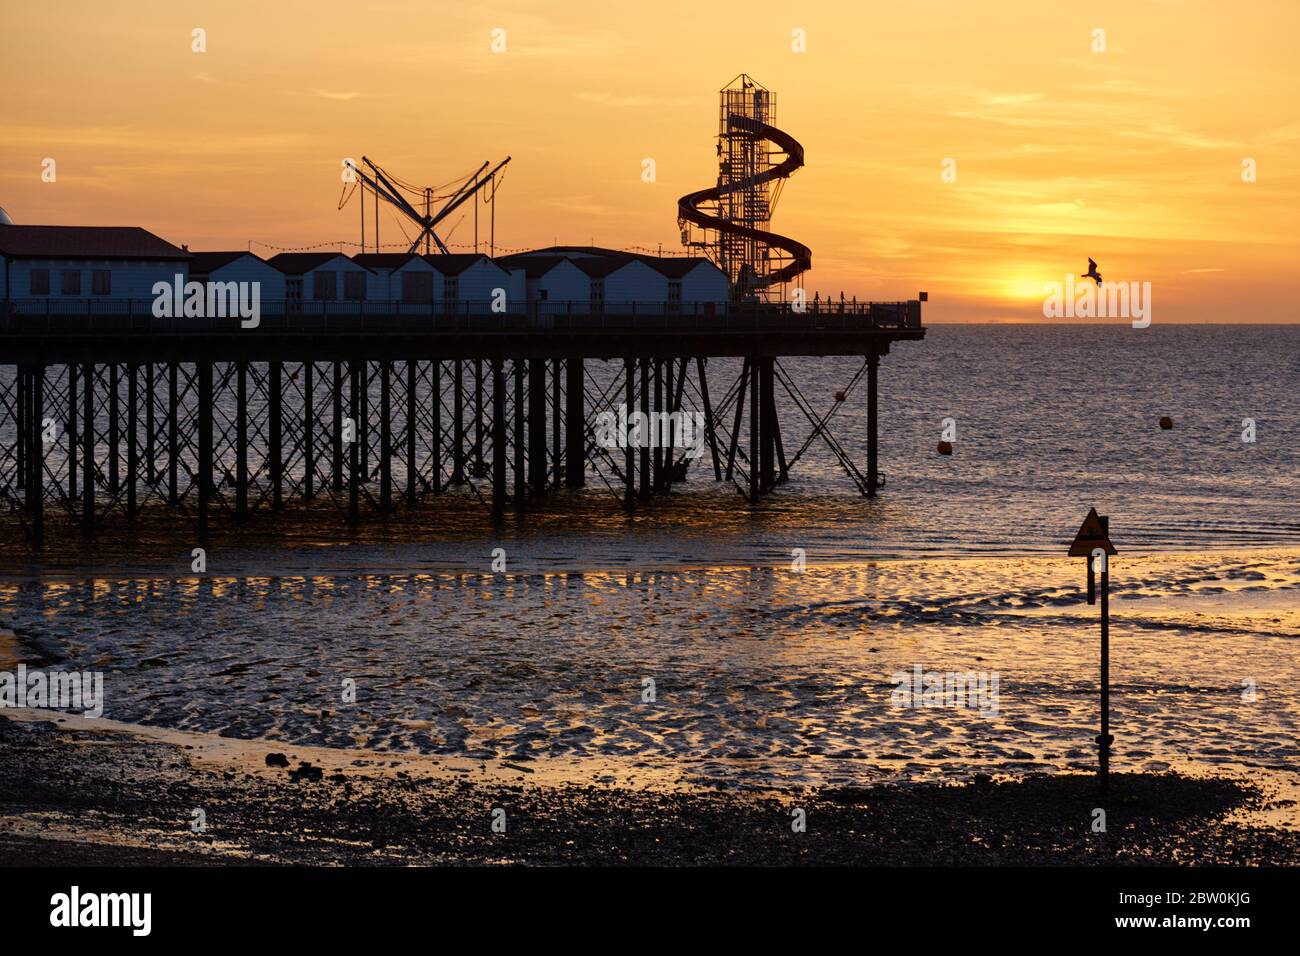 Herne Bay, Kent, UK. 28th May 2020: UK Weather. Sunset at Herne Bay pier at the end of a bright sunny day with a cool NE breeze. The next few days are set to have the same weather. Credit: Alan Payton/Alamy Live News Stock Photo